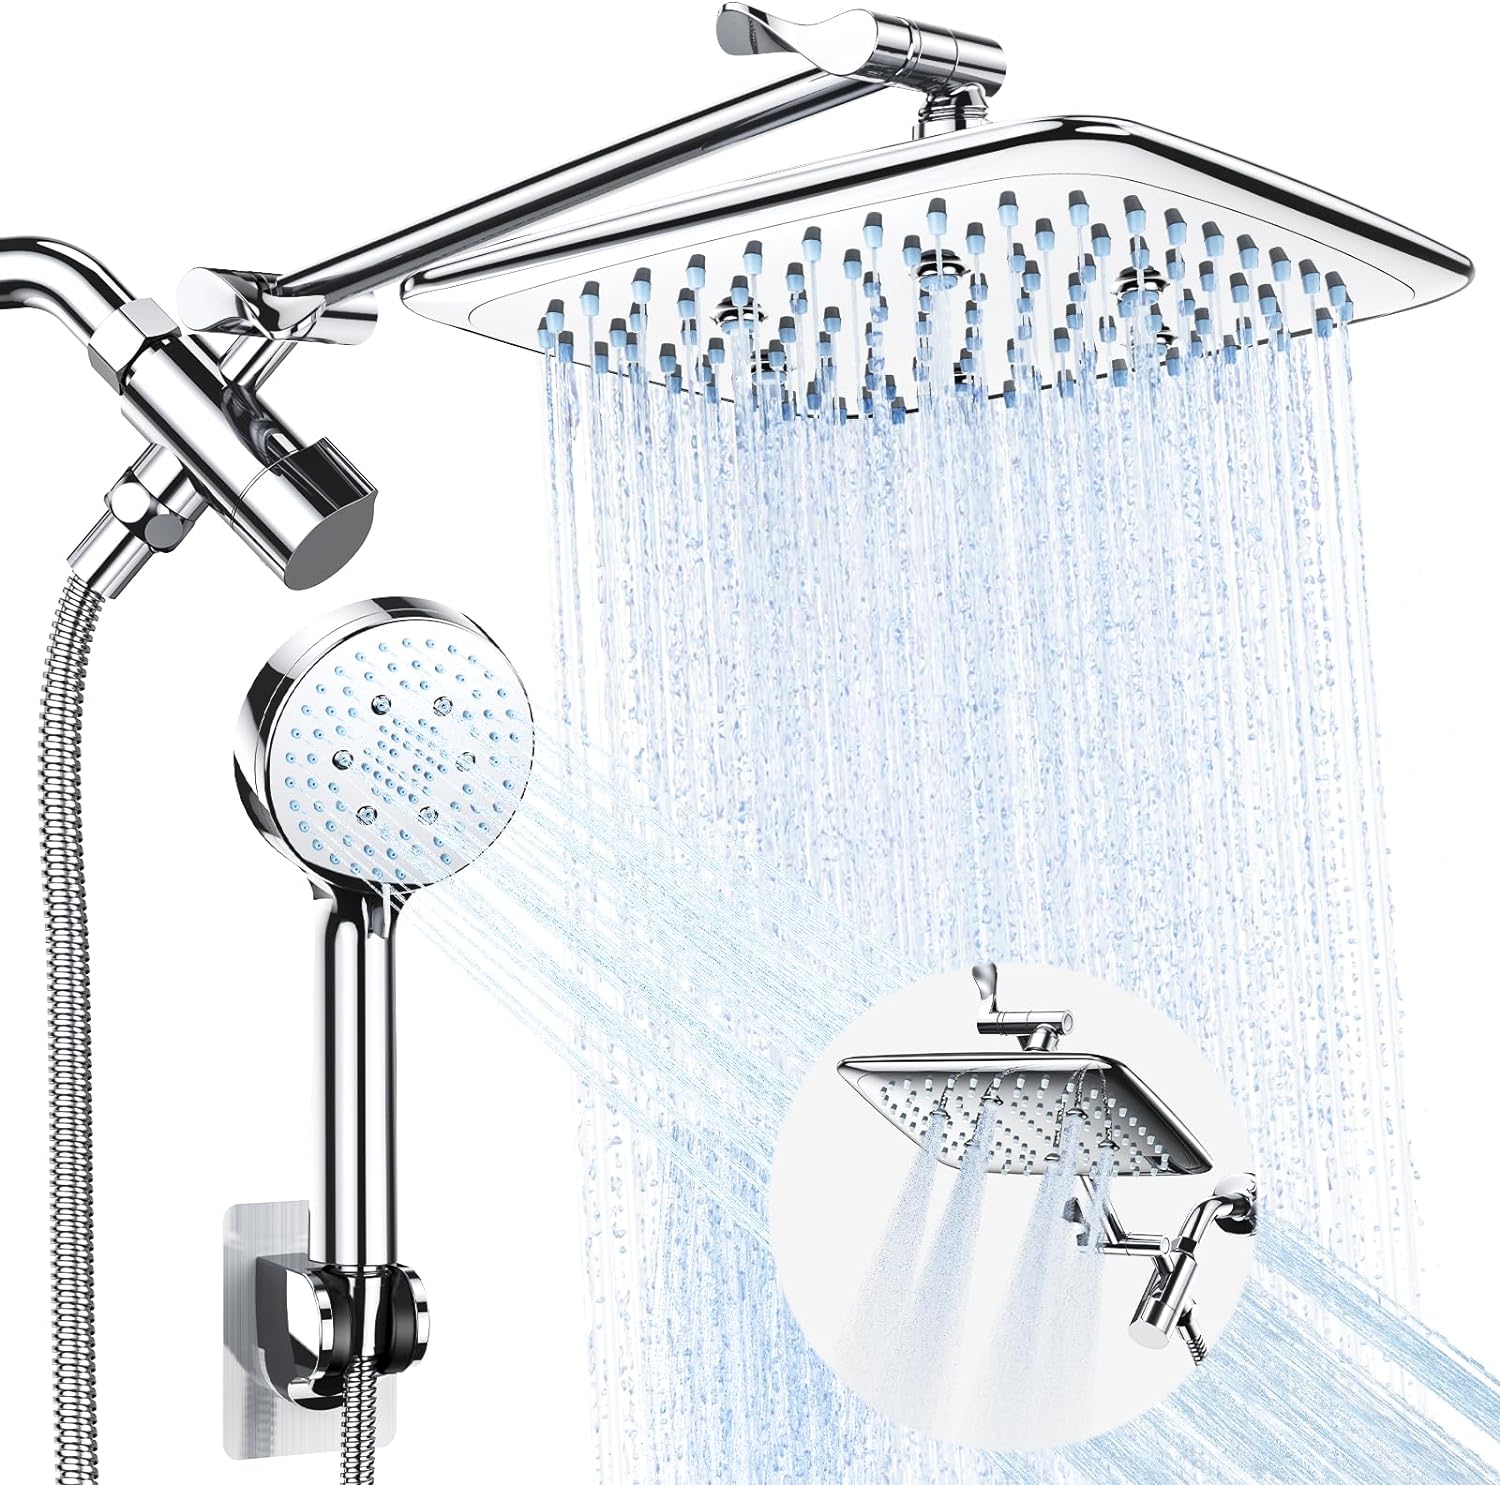 Veken Multifunction High Pressure Rain Shower Head Combo with Extension Arm- Easy to Install Wide Rainfall Showerhead with 3 Water Spray Modes – Adjustable Dual Showerhead with Anti-Clog Nozzles